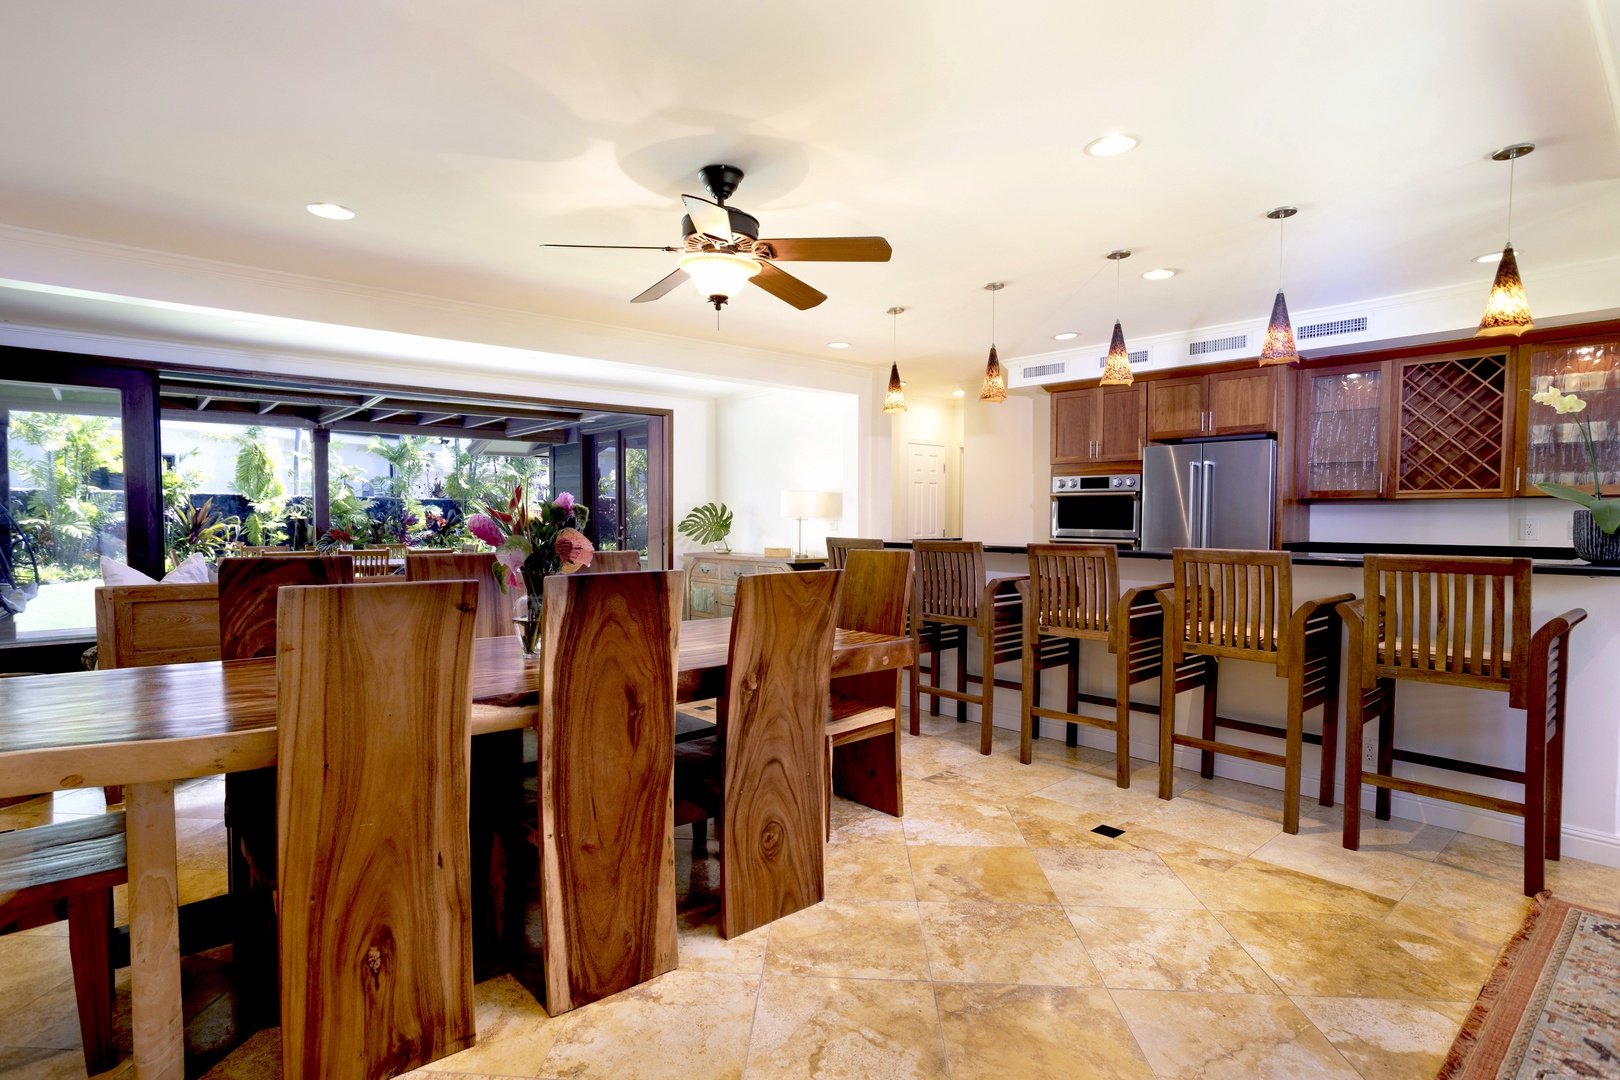 Kailua Vacation Rentals, Mokulua Seaside - Rustic charm of the dining area with dining table for eight